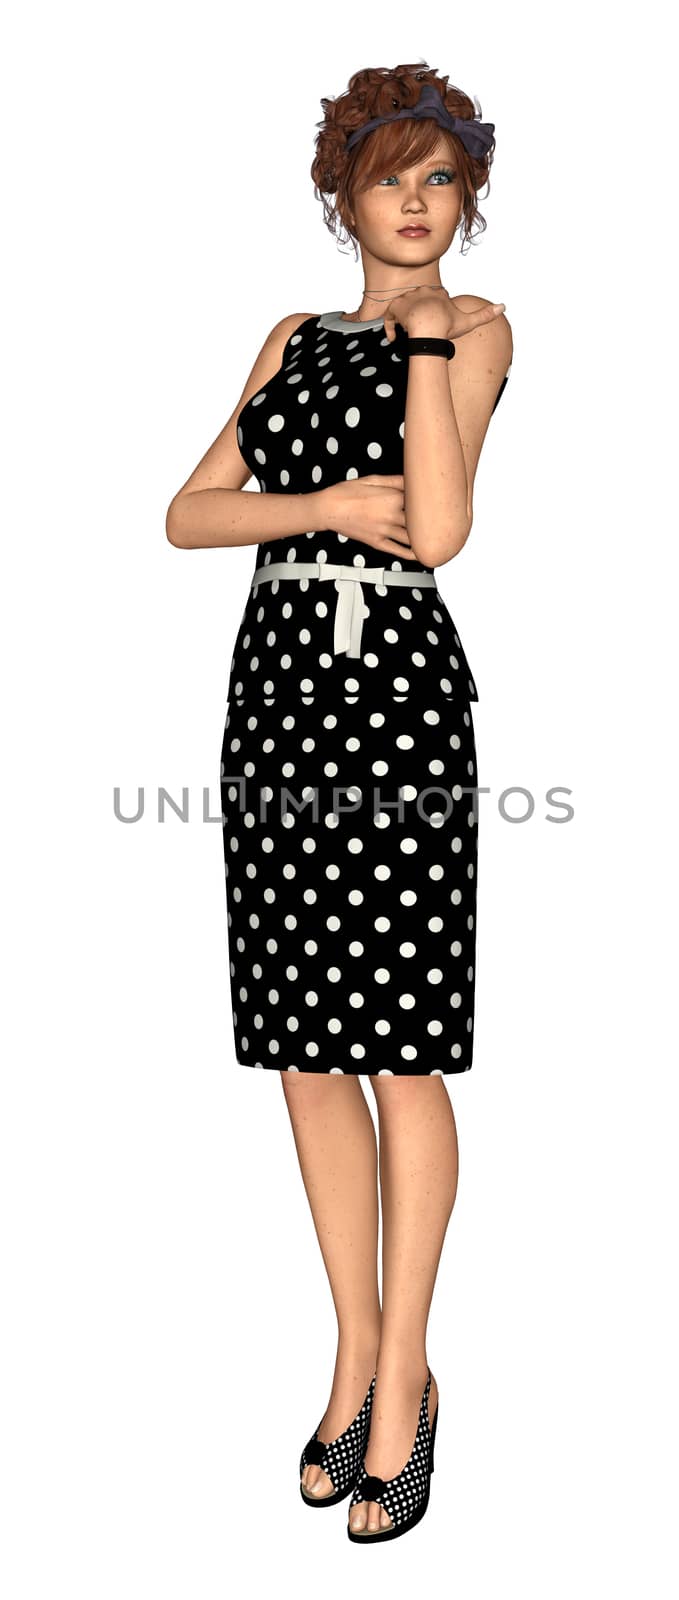 3D digital render of a beautiful retro girl isolated on white background